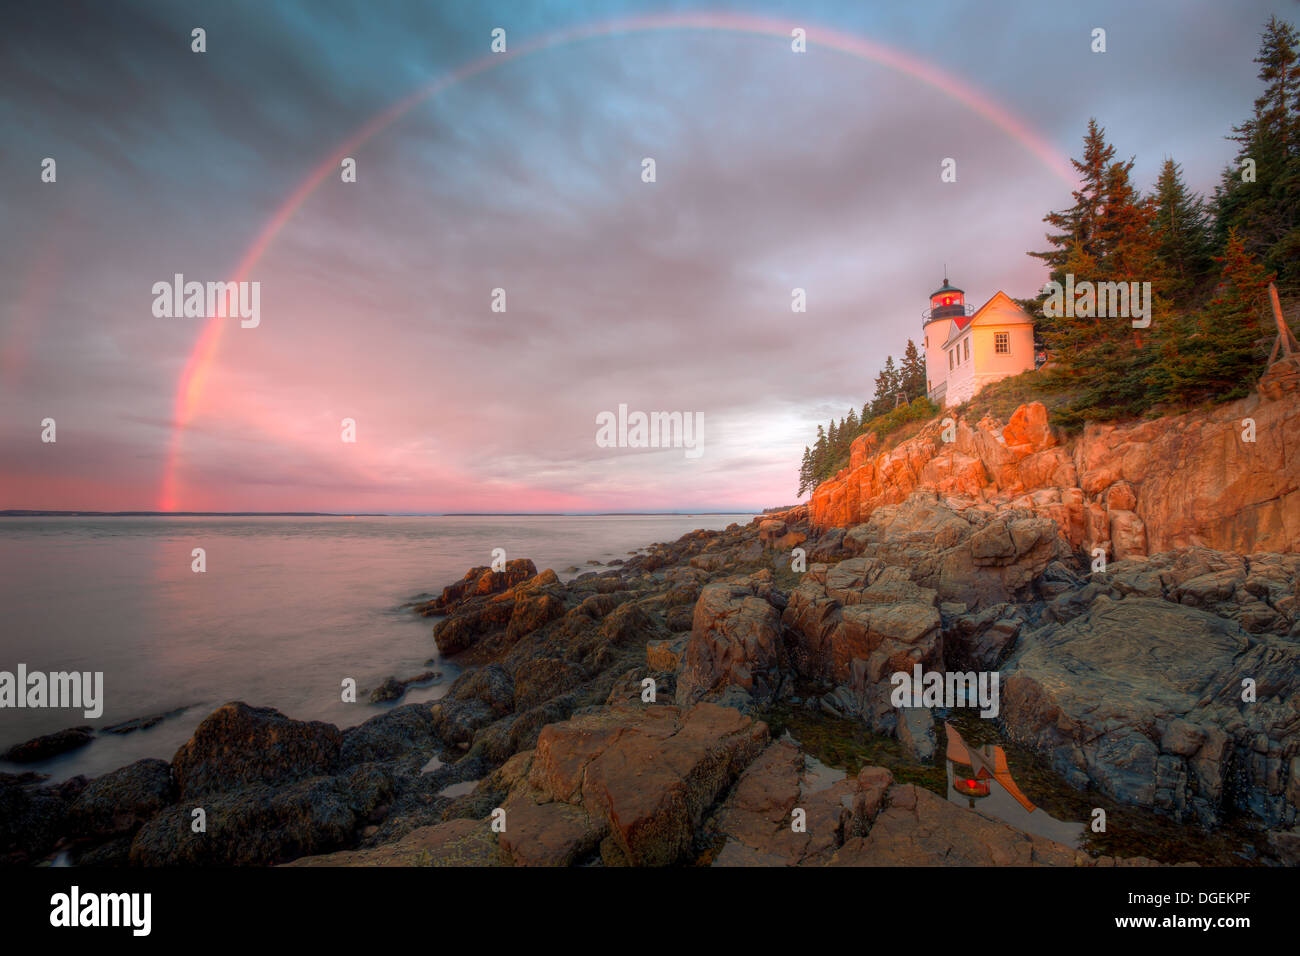 A double rainbow appears briefly at sunrise over Bass Harbor Head Lighthouse, and is reflected in a tidal pool, in Acadia National Park. Stock Photo